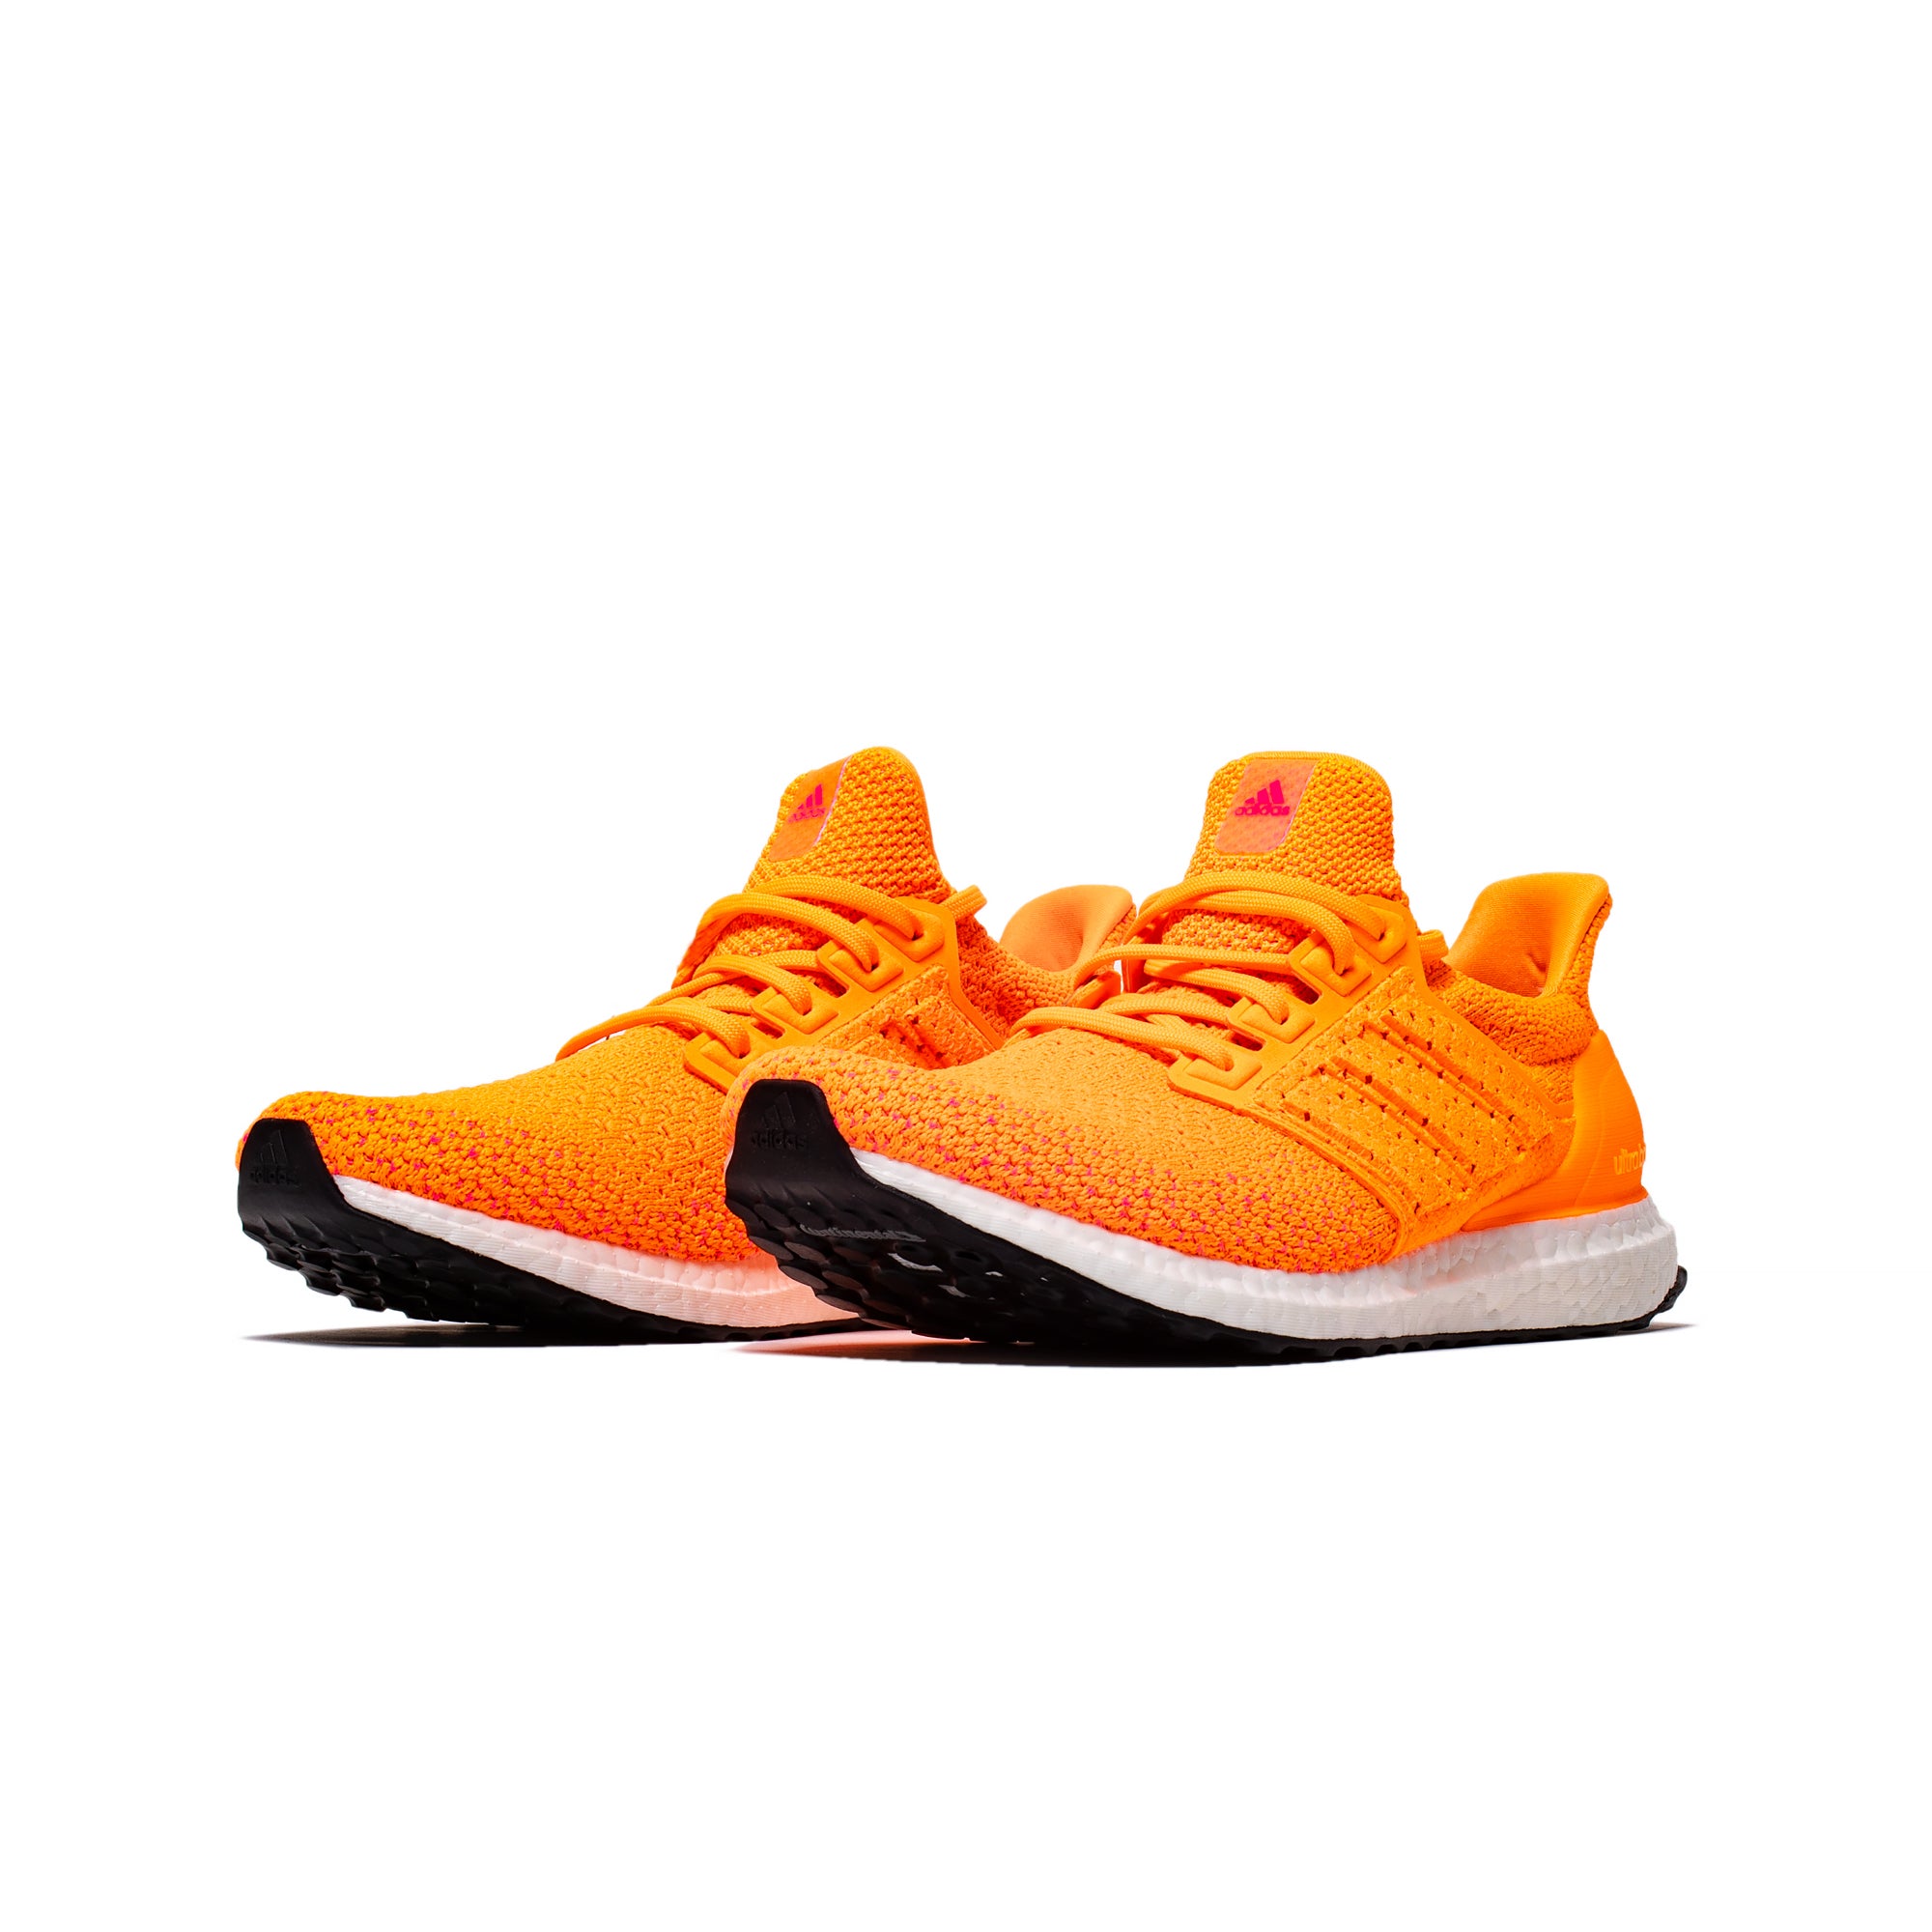 Adidas Mens Ultraboost Clima DNA Shoes